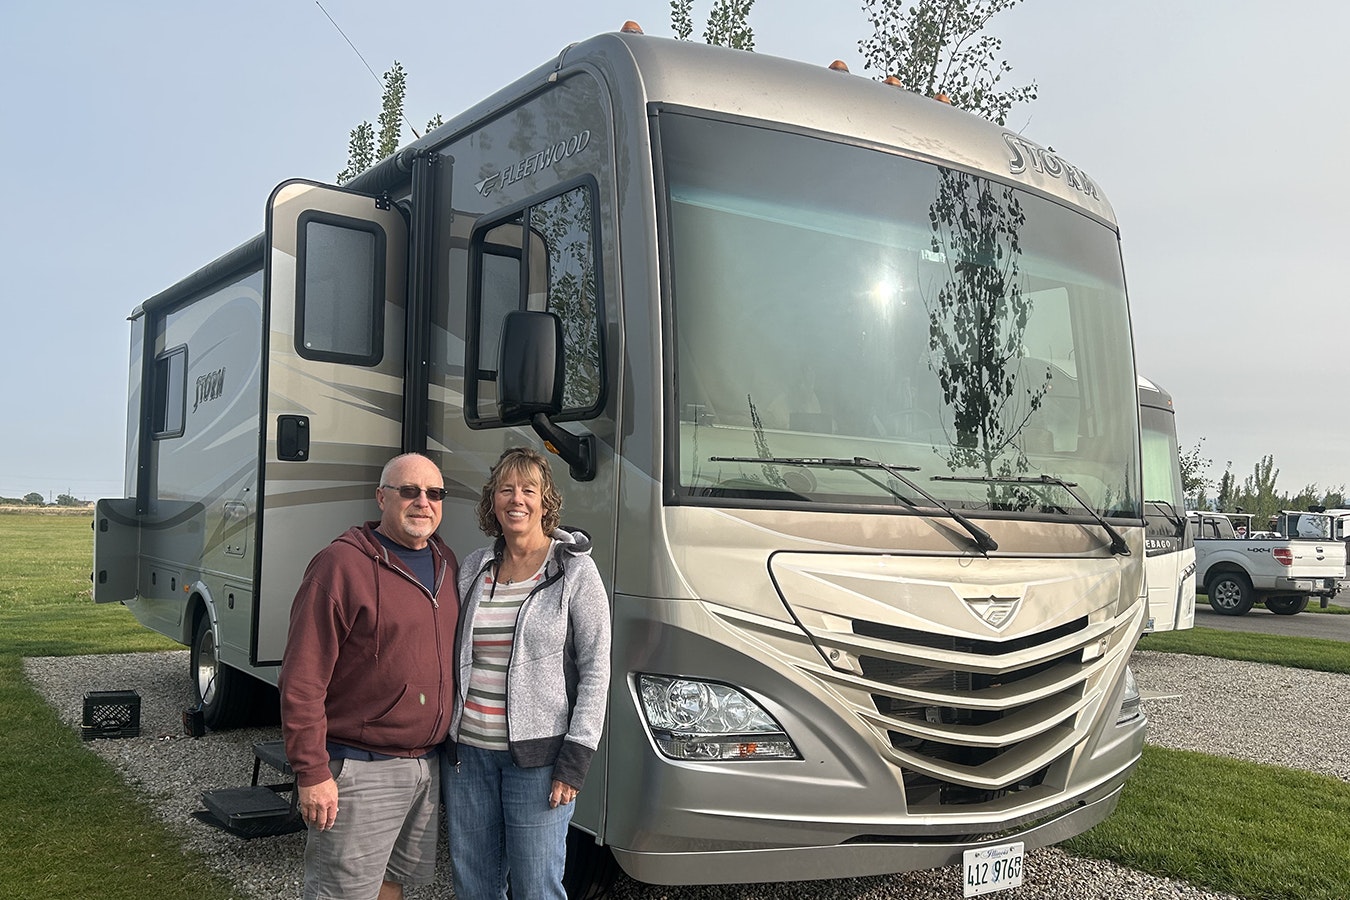 Doug and Trish Biggs of Carbondale, Illinois, are traveling through Wyoming this summer in their Fleetwood Storm motor home. By luxury RV standards, the Briggs are roughing it in their 31-foot 2017 model.